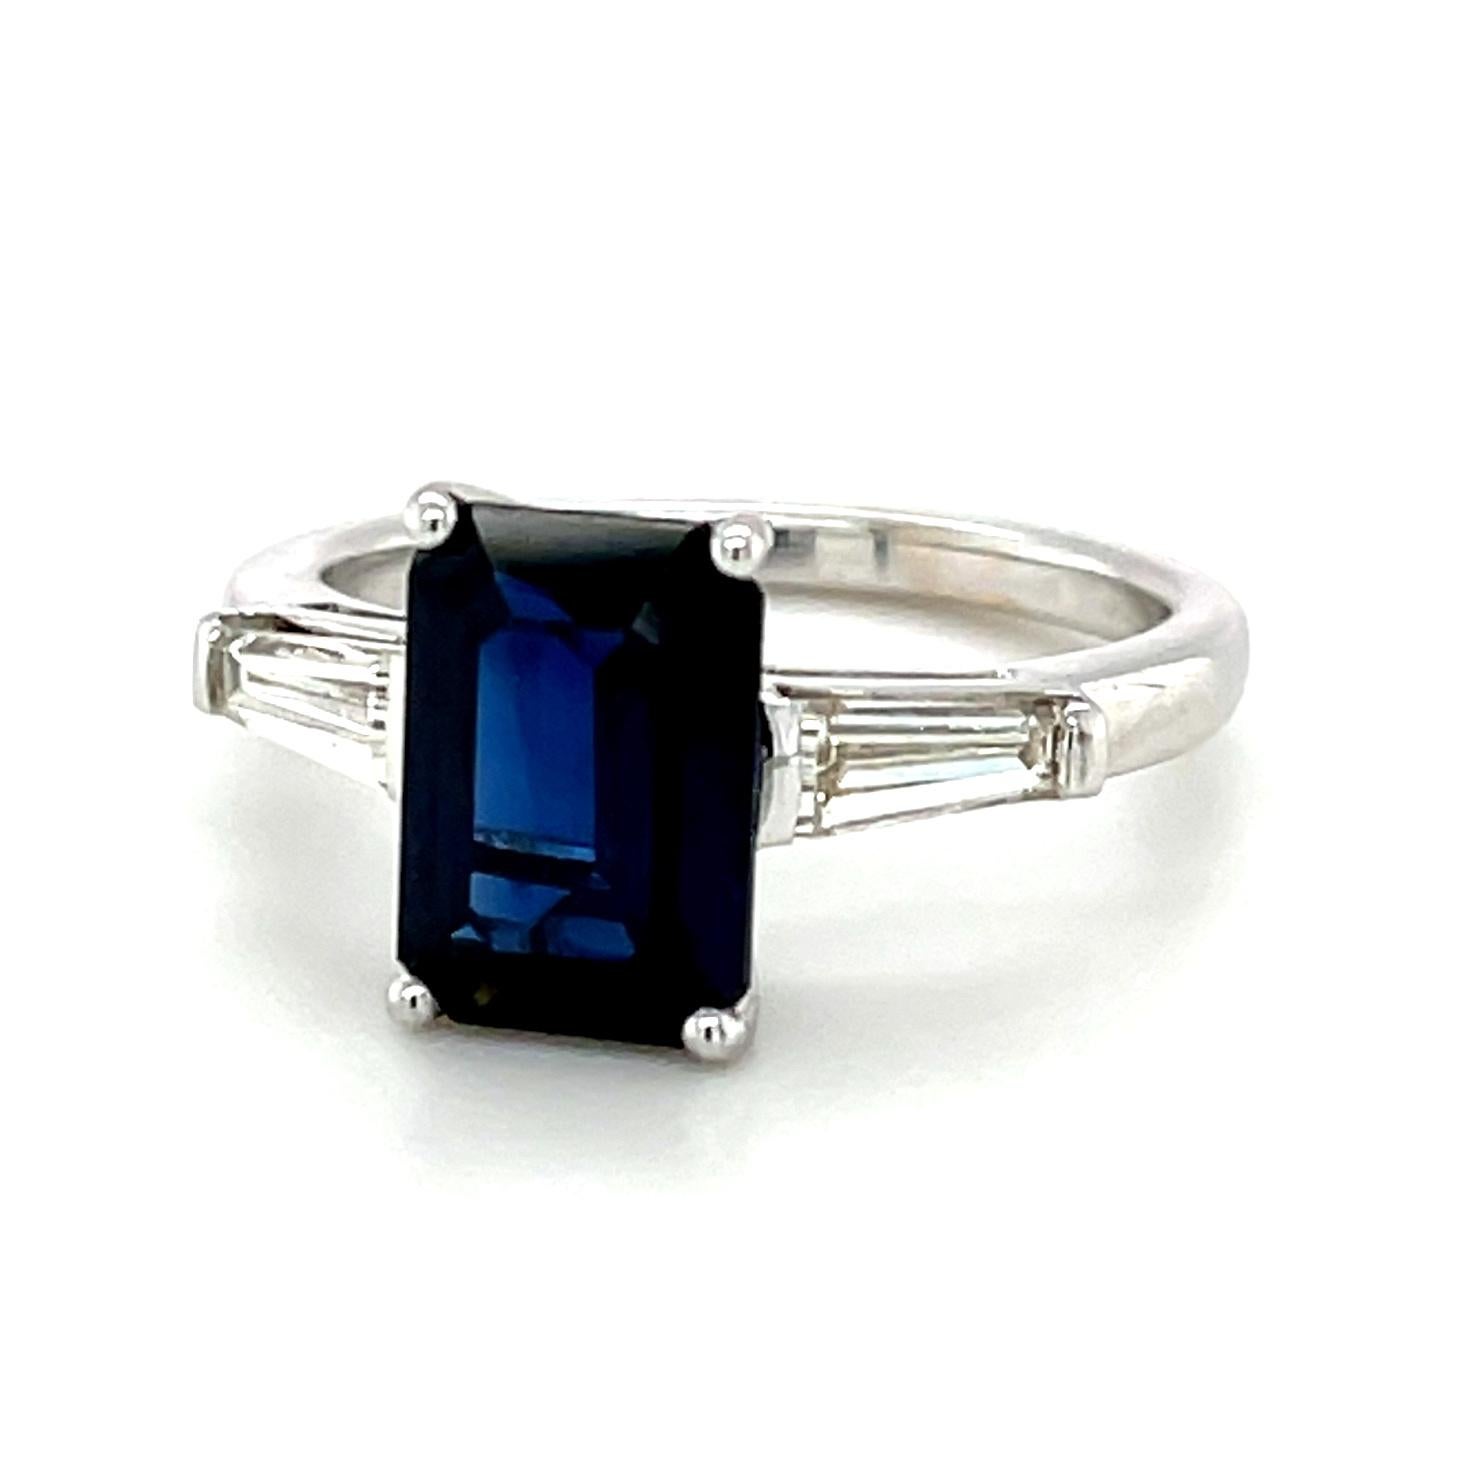 Artisan Blue Sapphire and Diamond 3-Stone Engagement Ring in White Gold, 2.61 Carats 